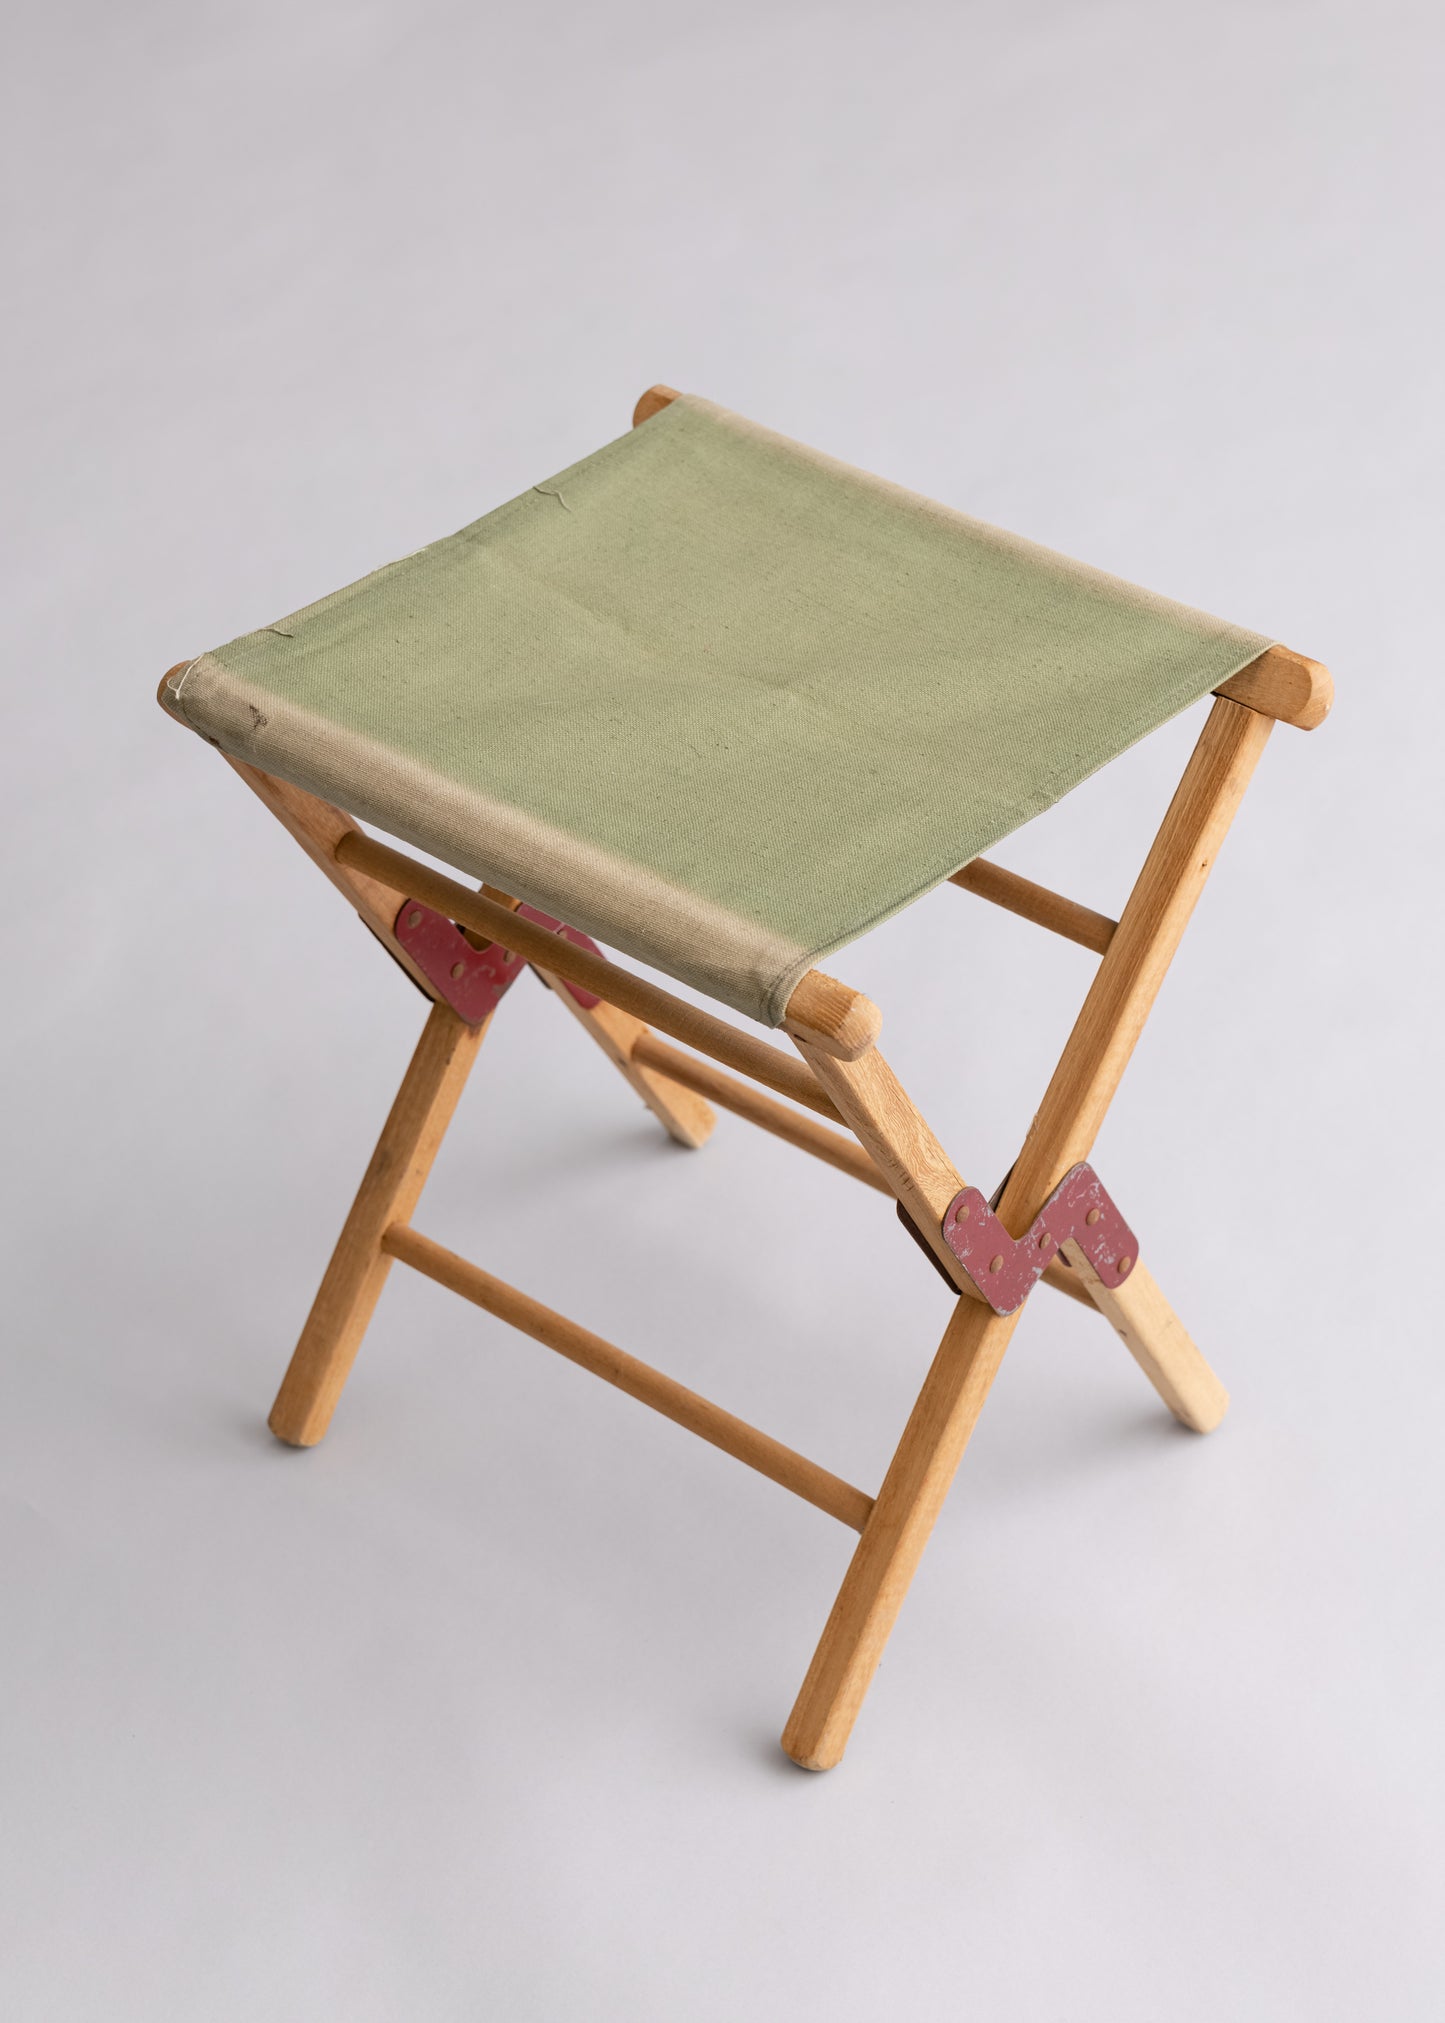 [ THE VINTAGE ] 10's～40's Tucker Duck & Rubber Co. Canvas Folding Camp Stool Cot c/# khaki green